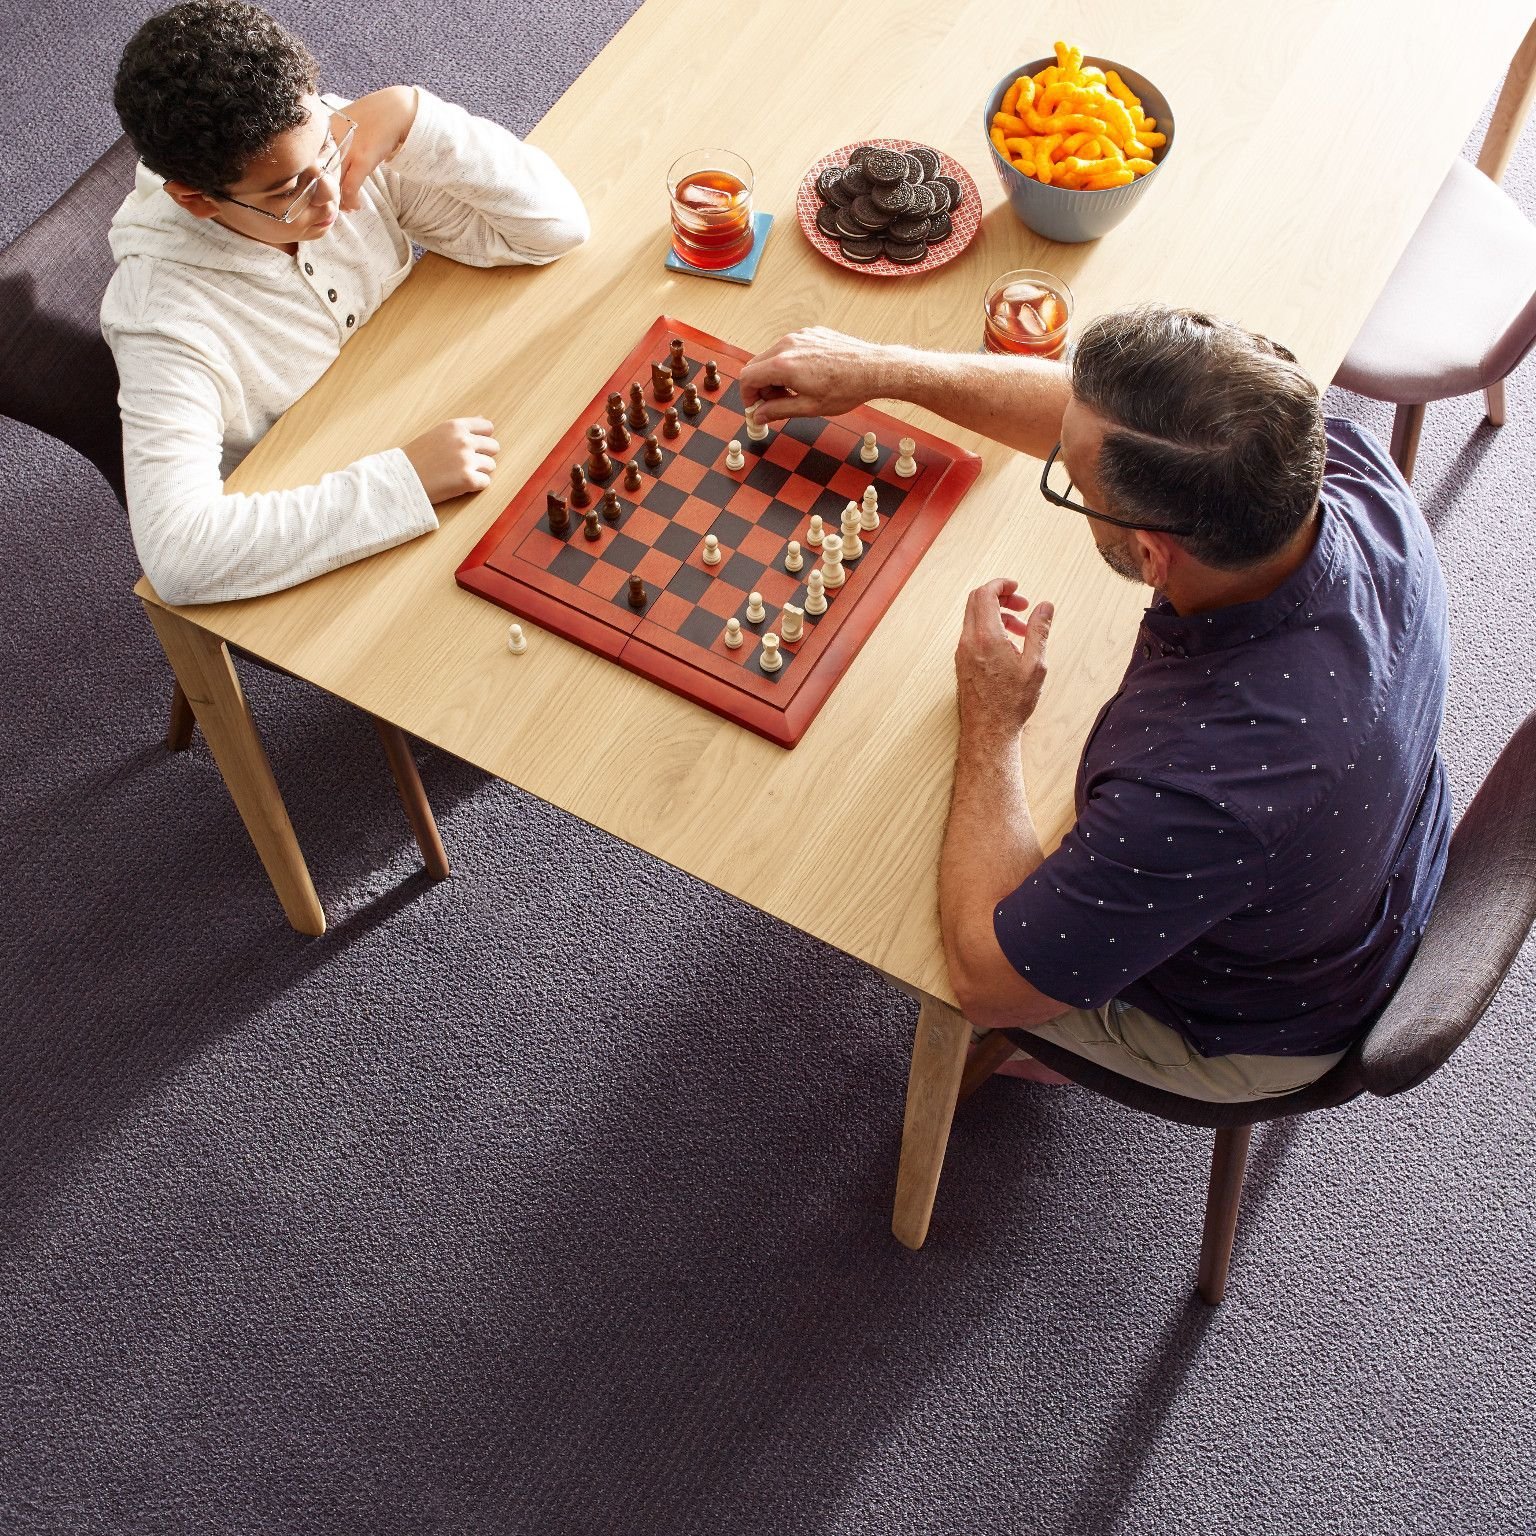 two men playing chess at a wooden table in a room with purple carpet from Northcraft Flooring & Design in Raytown, MO